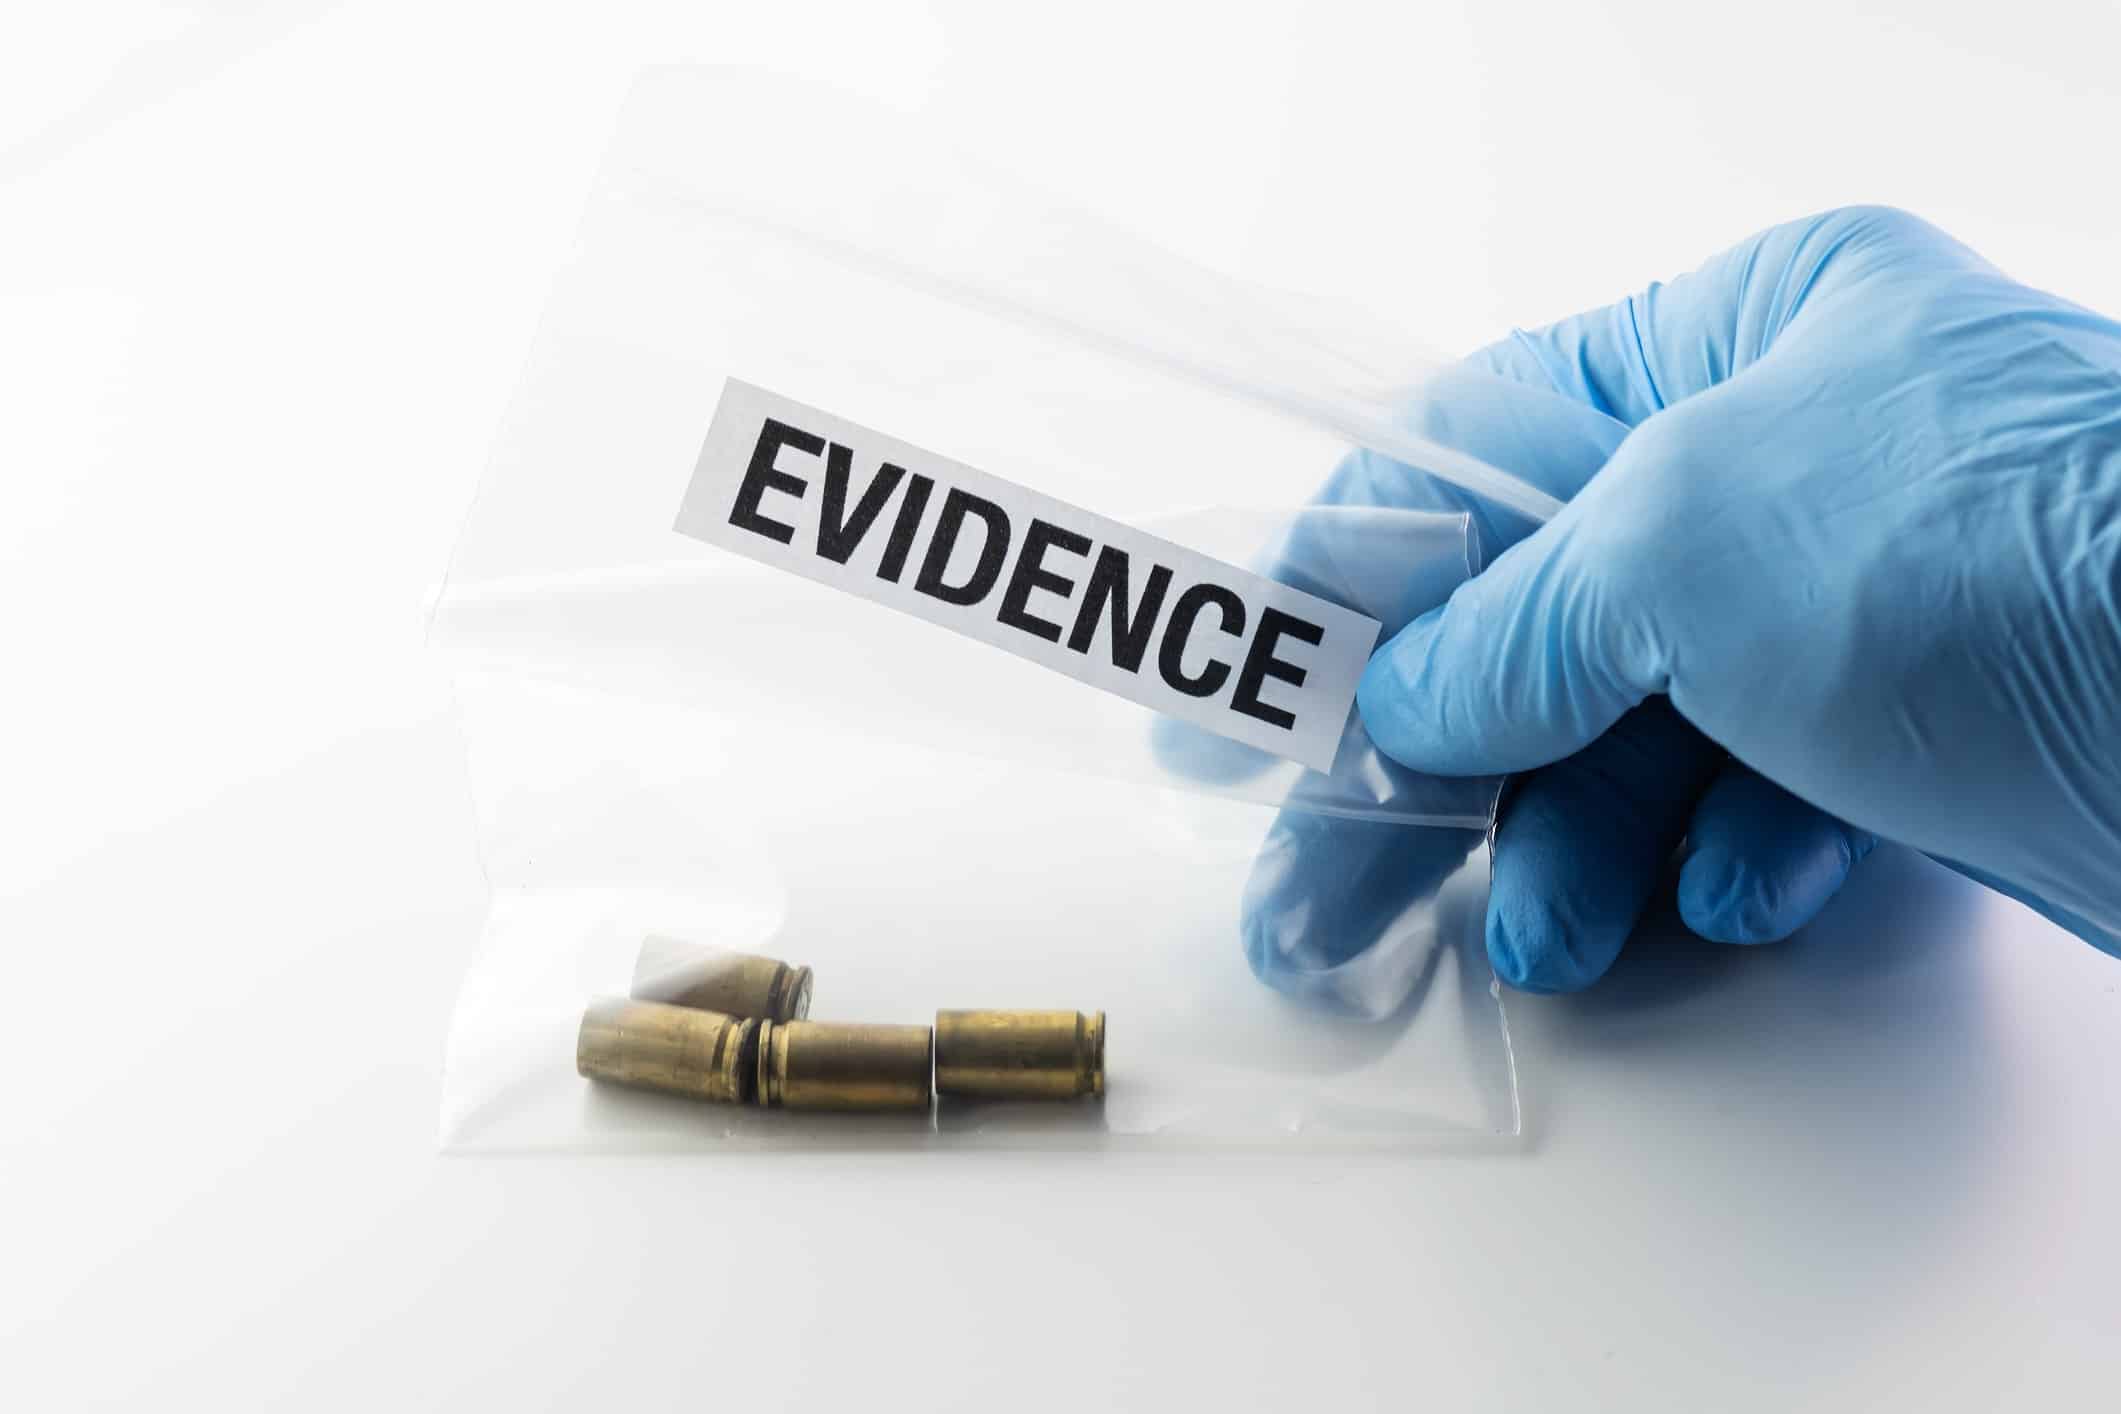 case study about forensic science